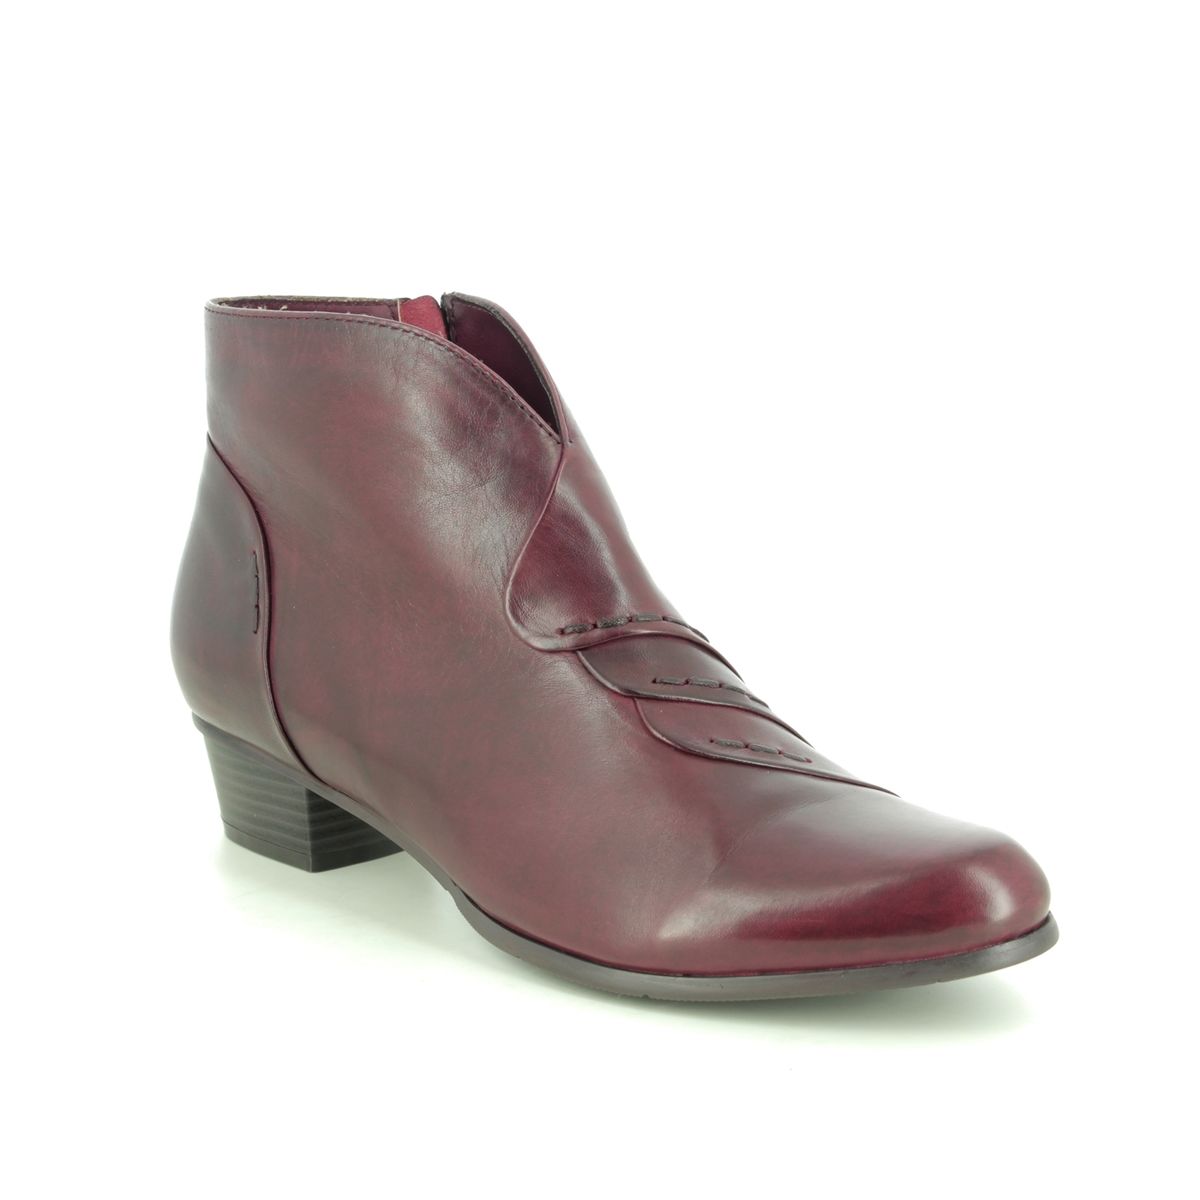 Regarde le Ciel Stefany 335 Wine leather Womens Ankle Boots 0335-008 in a Plain Leather in Size 41